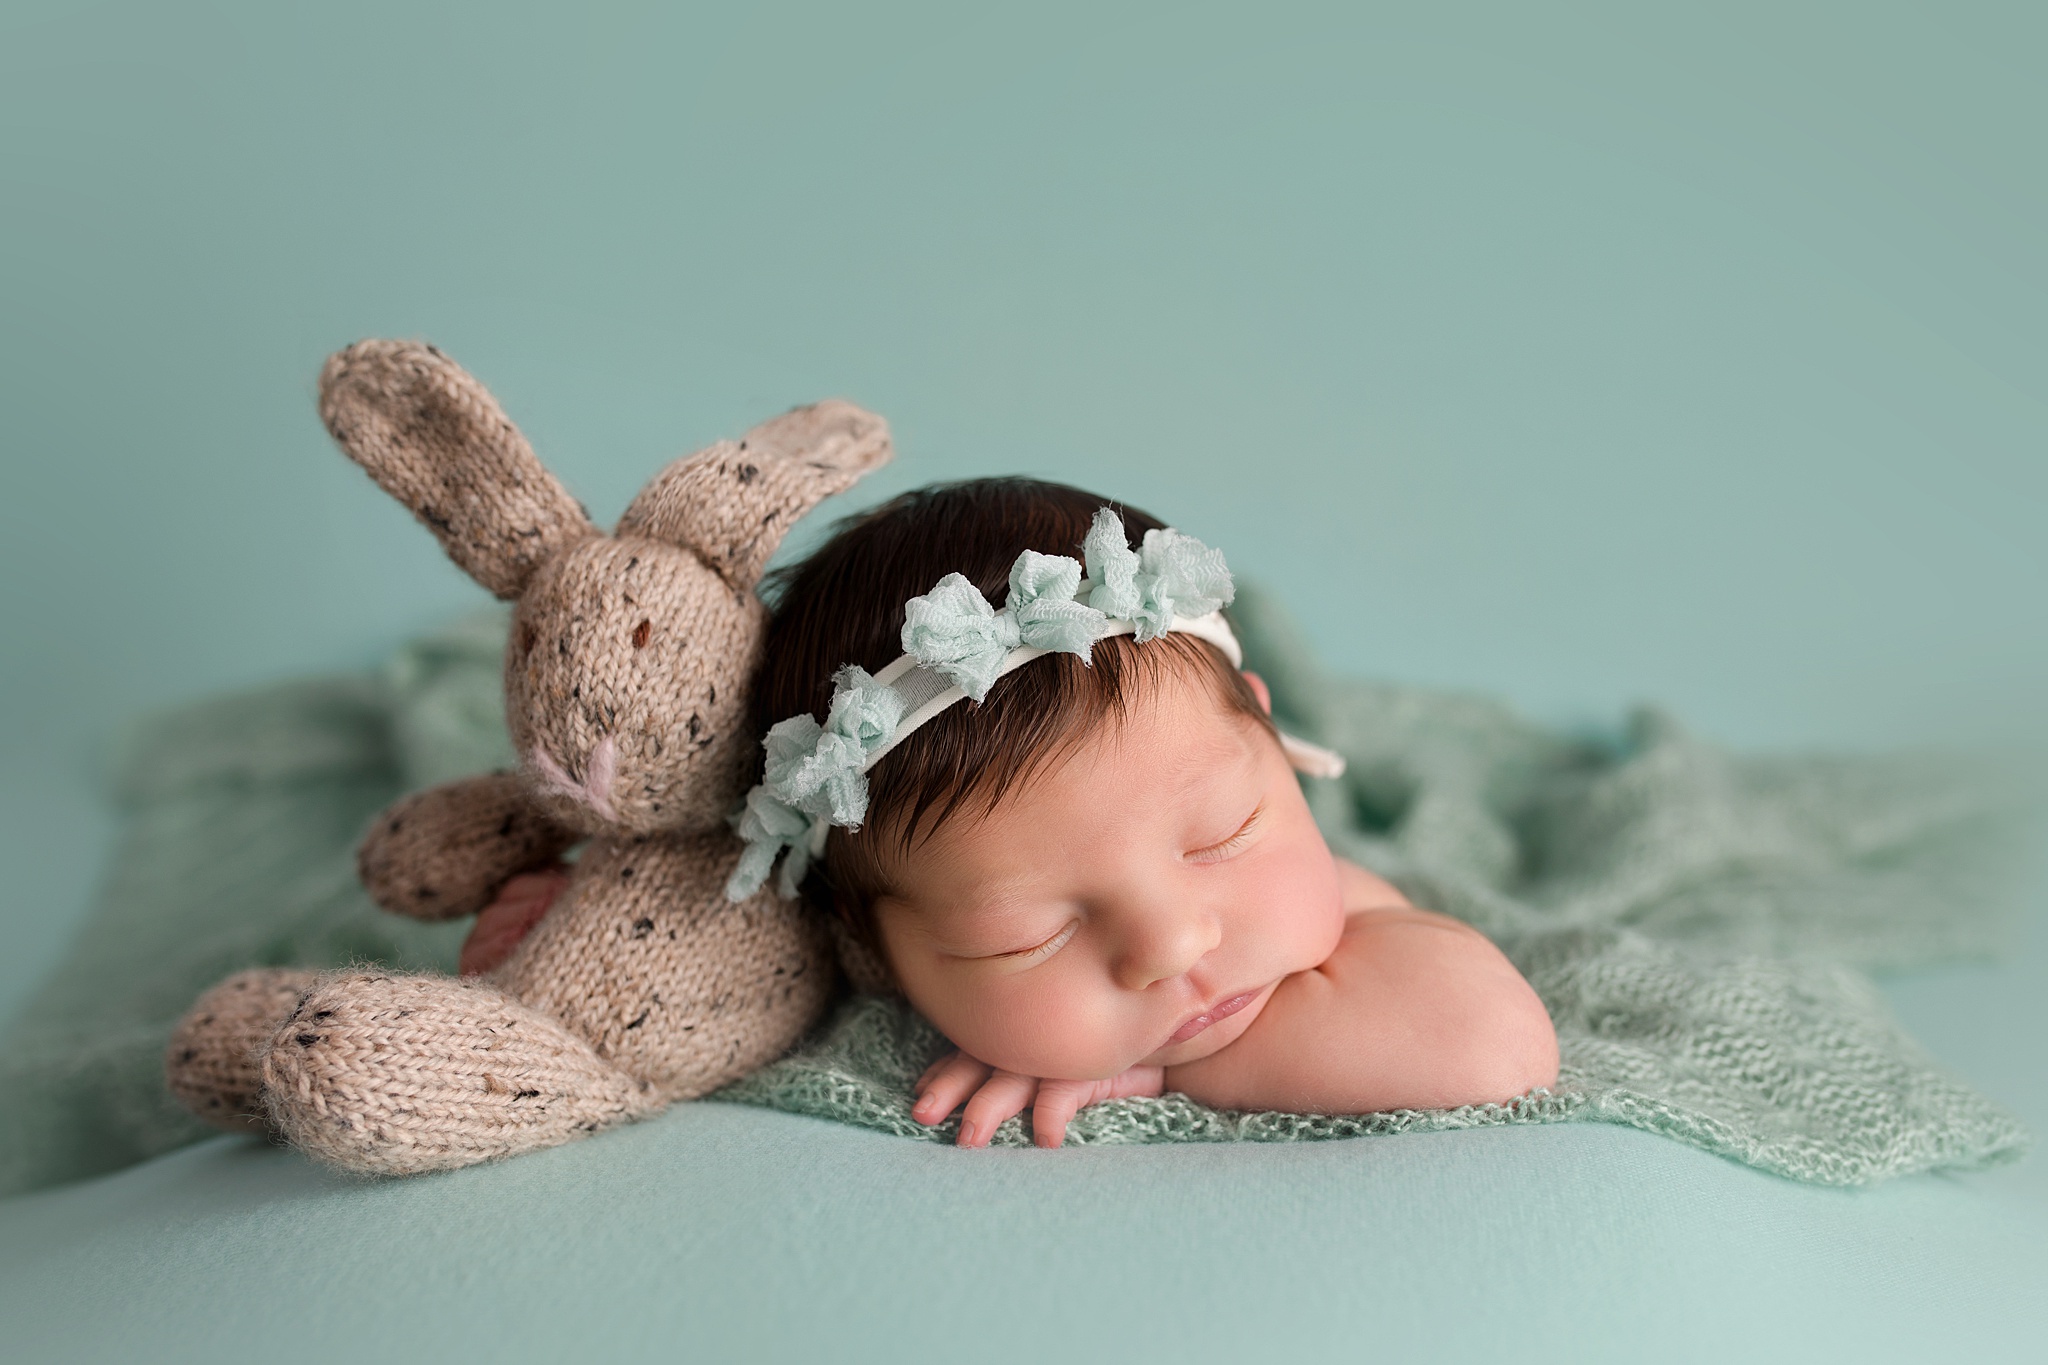 Newborn Photography Tips for Great Baby Photos